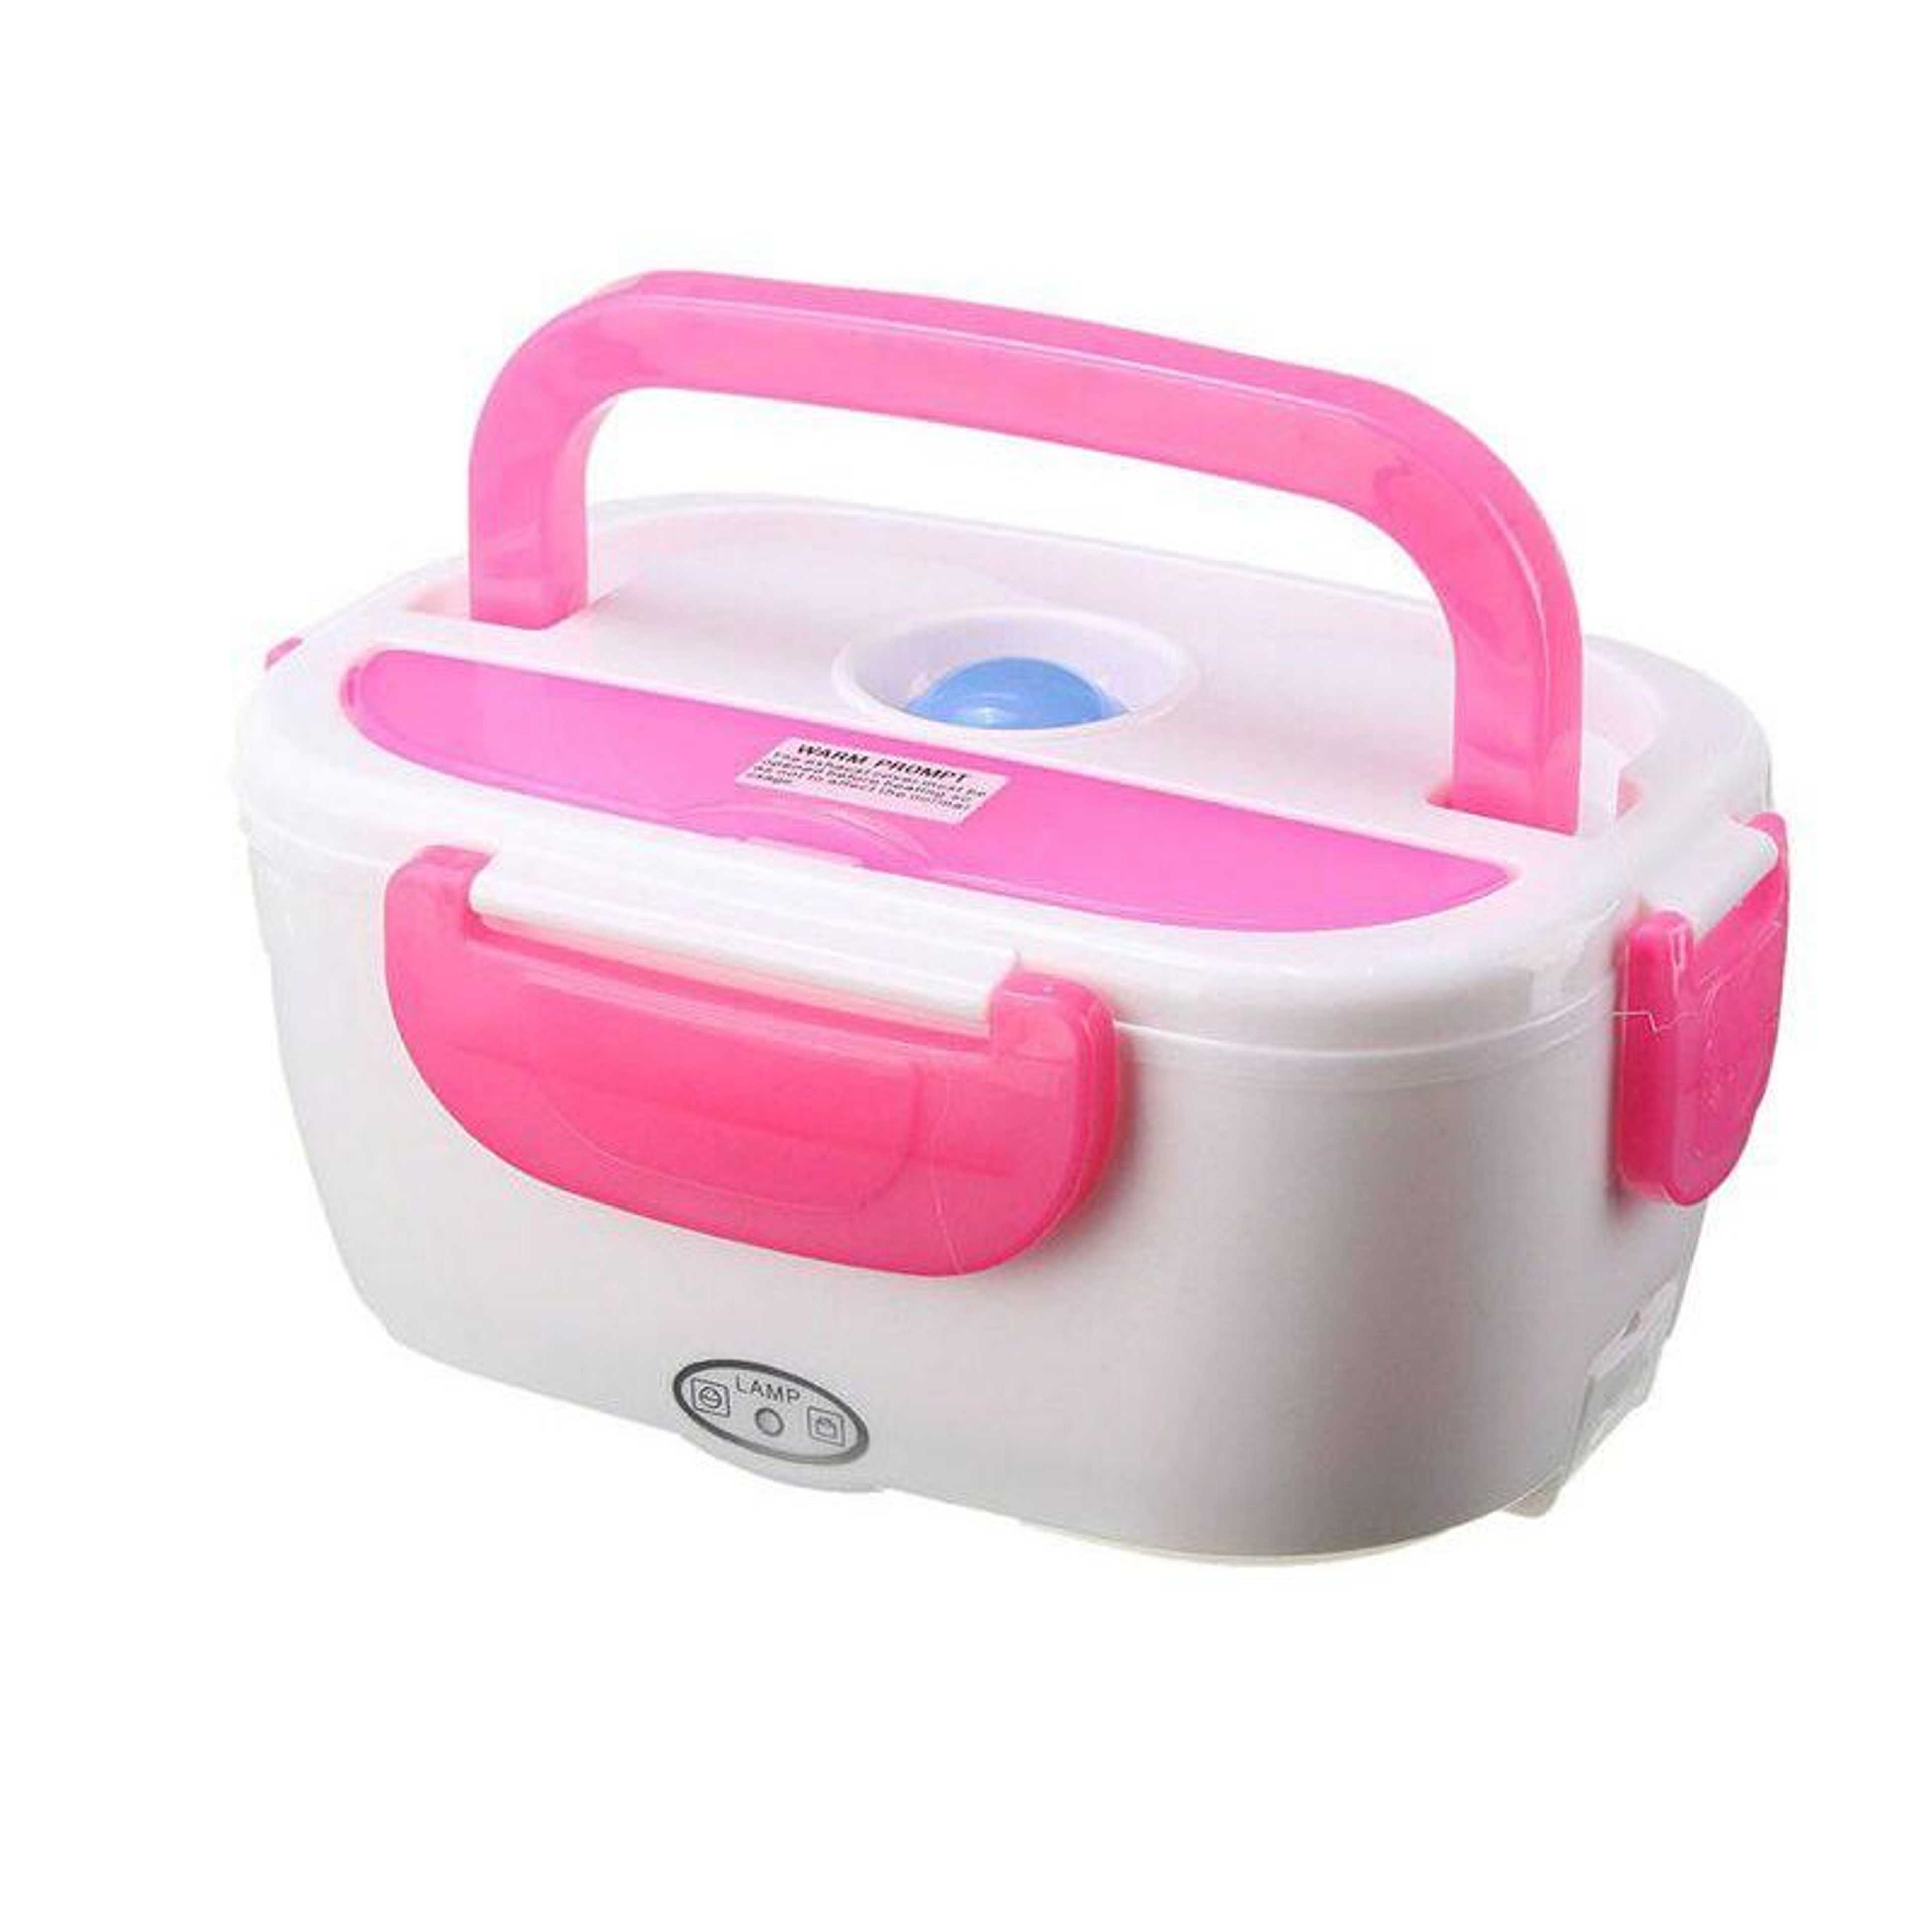 Electric Food Heating Lunch Box For Student Multi-Functional Food Warmer Container For Travel Picnic School